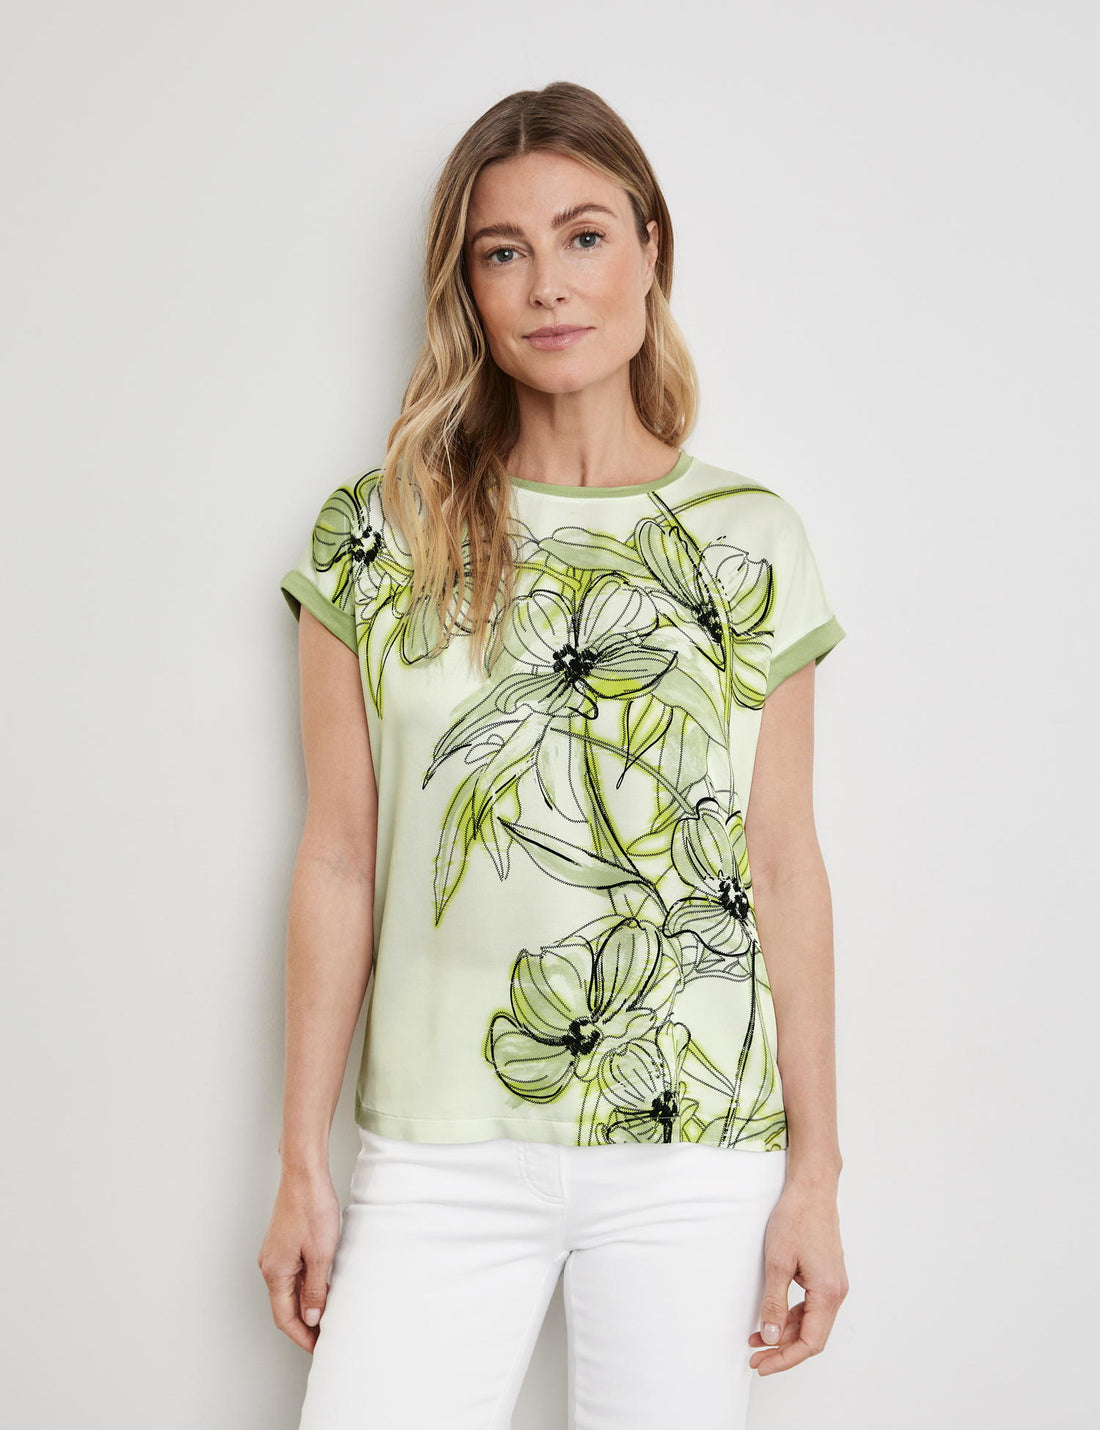 Blouse Top With Fabric Panelling And A Front Print_270039-44043_50948_01